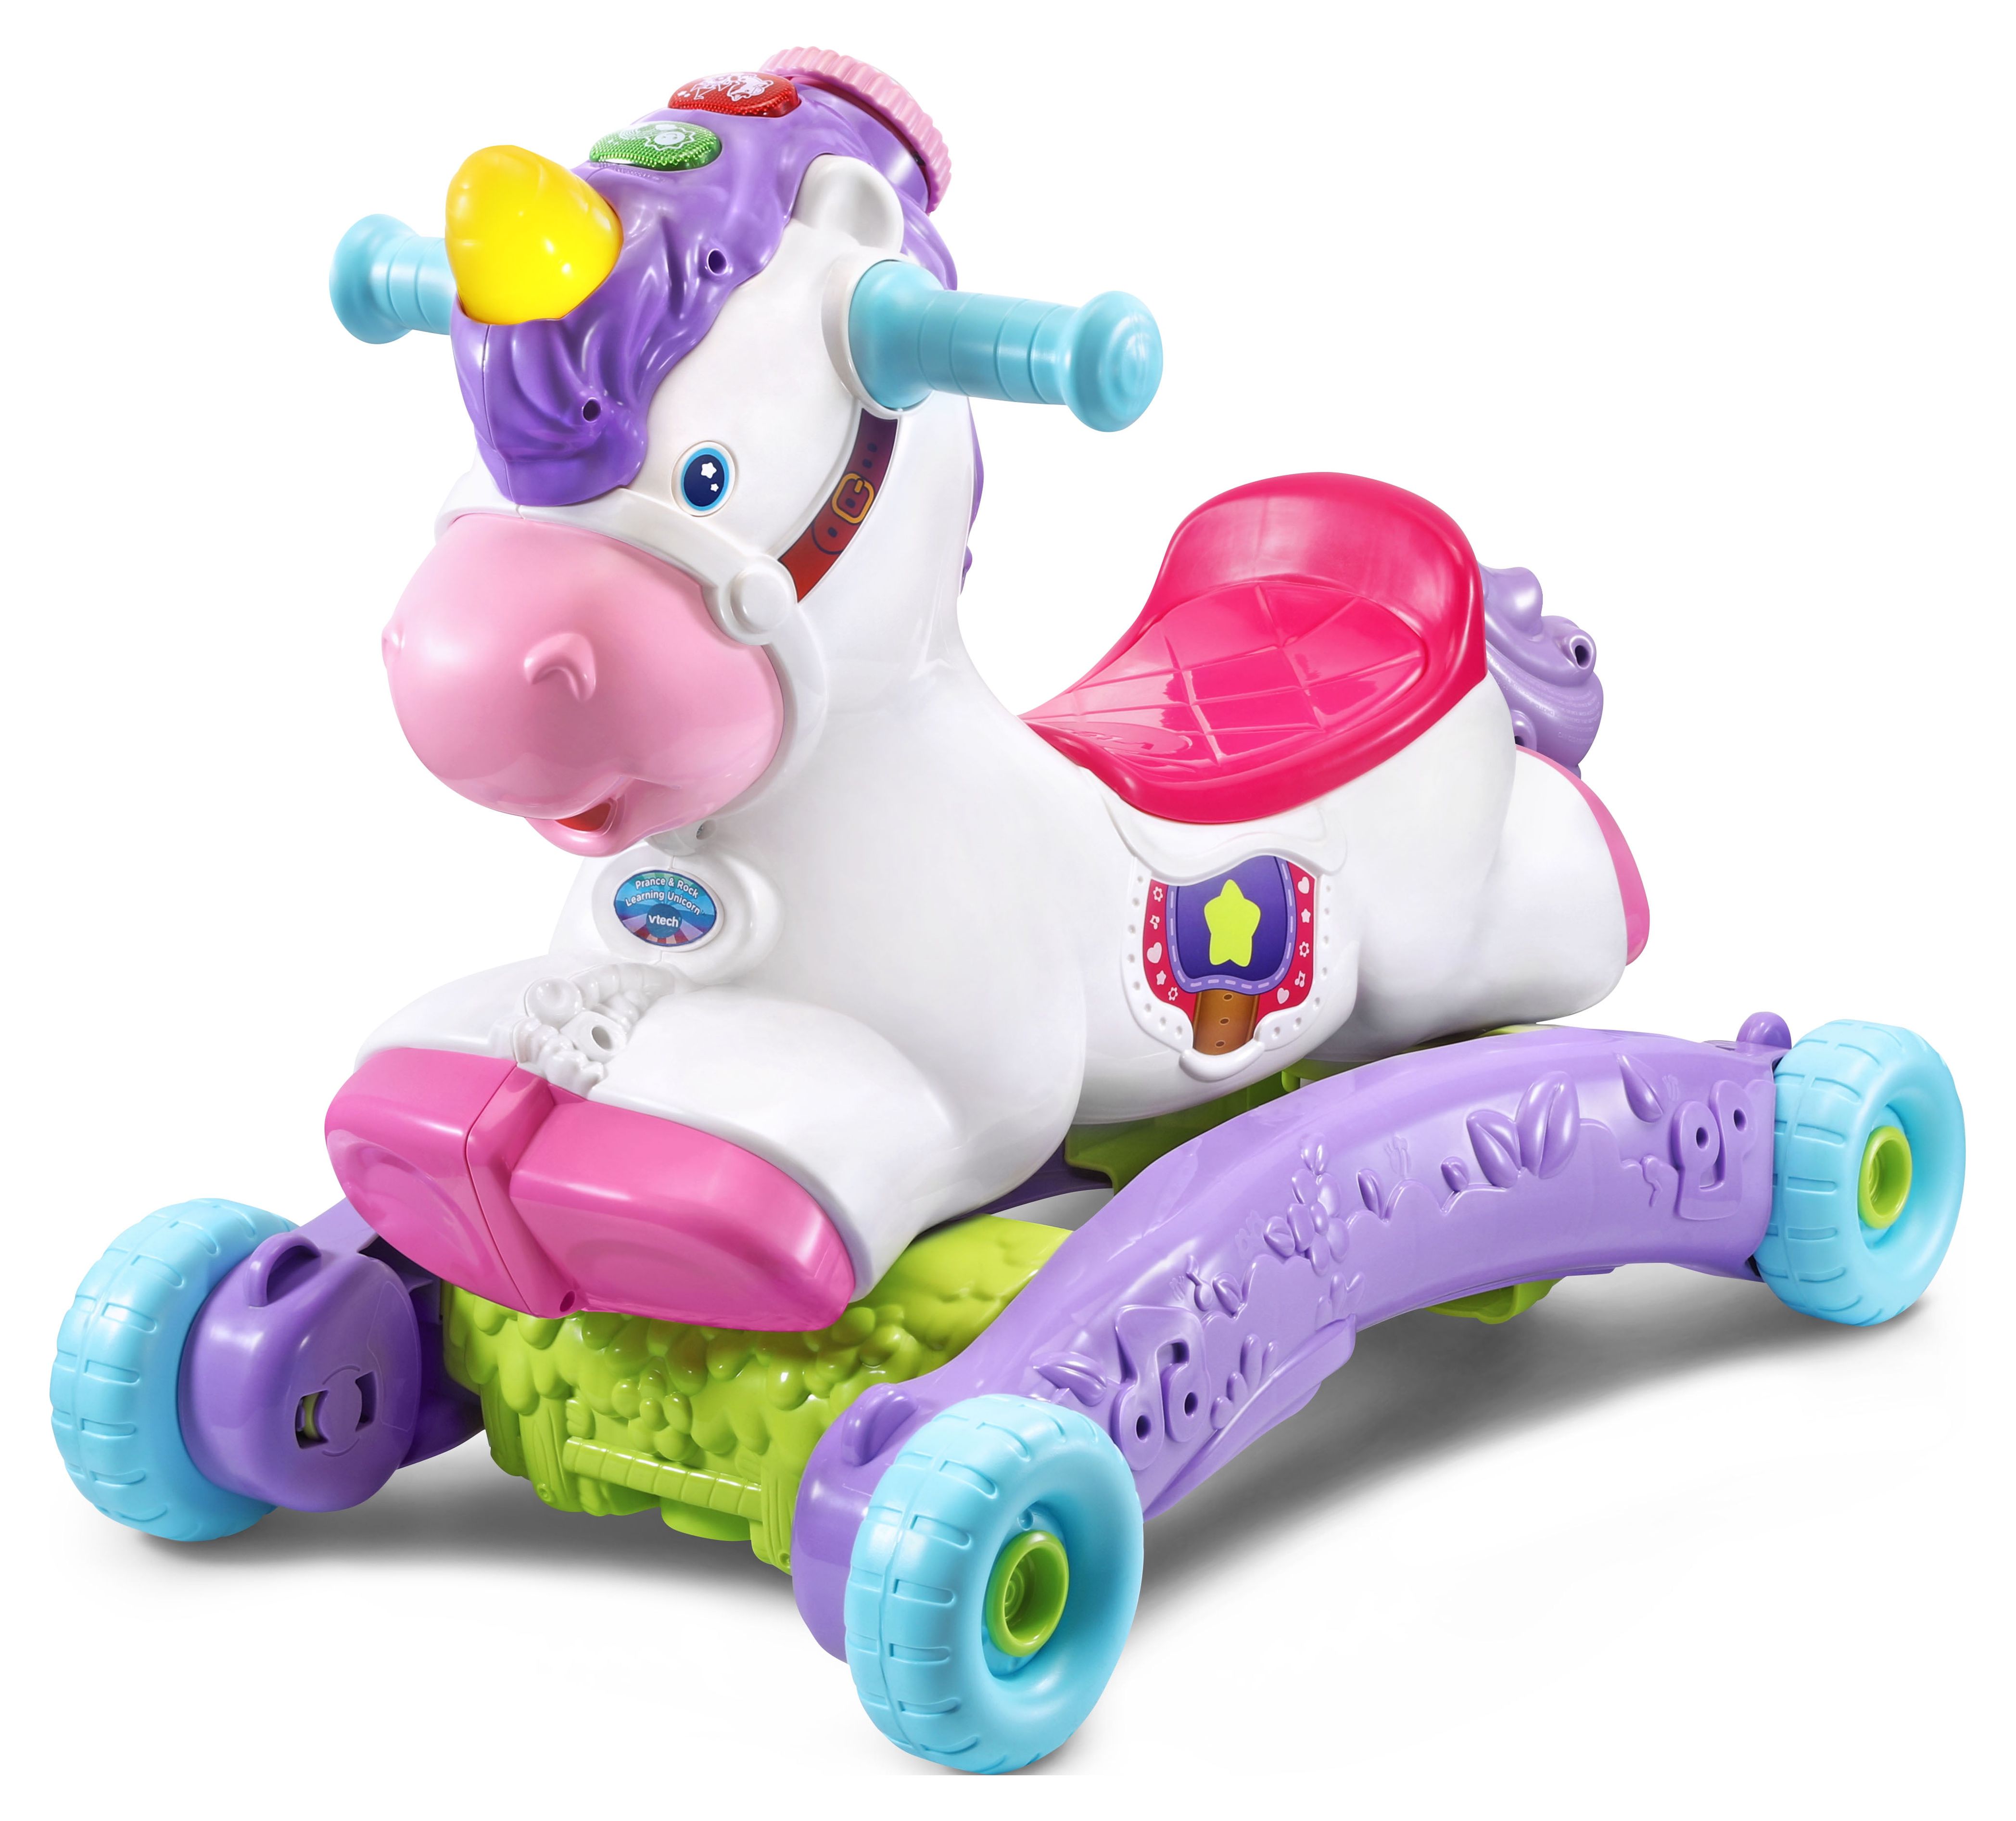 VTech Prance and Rock Learning Unicorn, Rocker to Rider Toy, Motion-Activated Responses - image 11 of 14